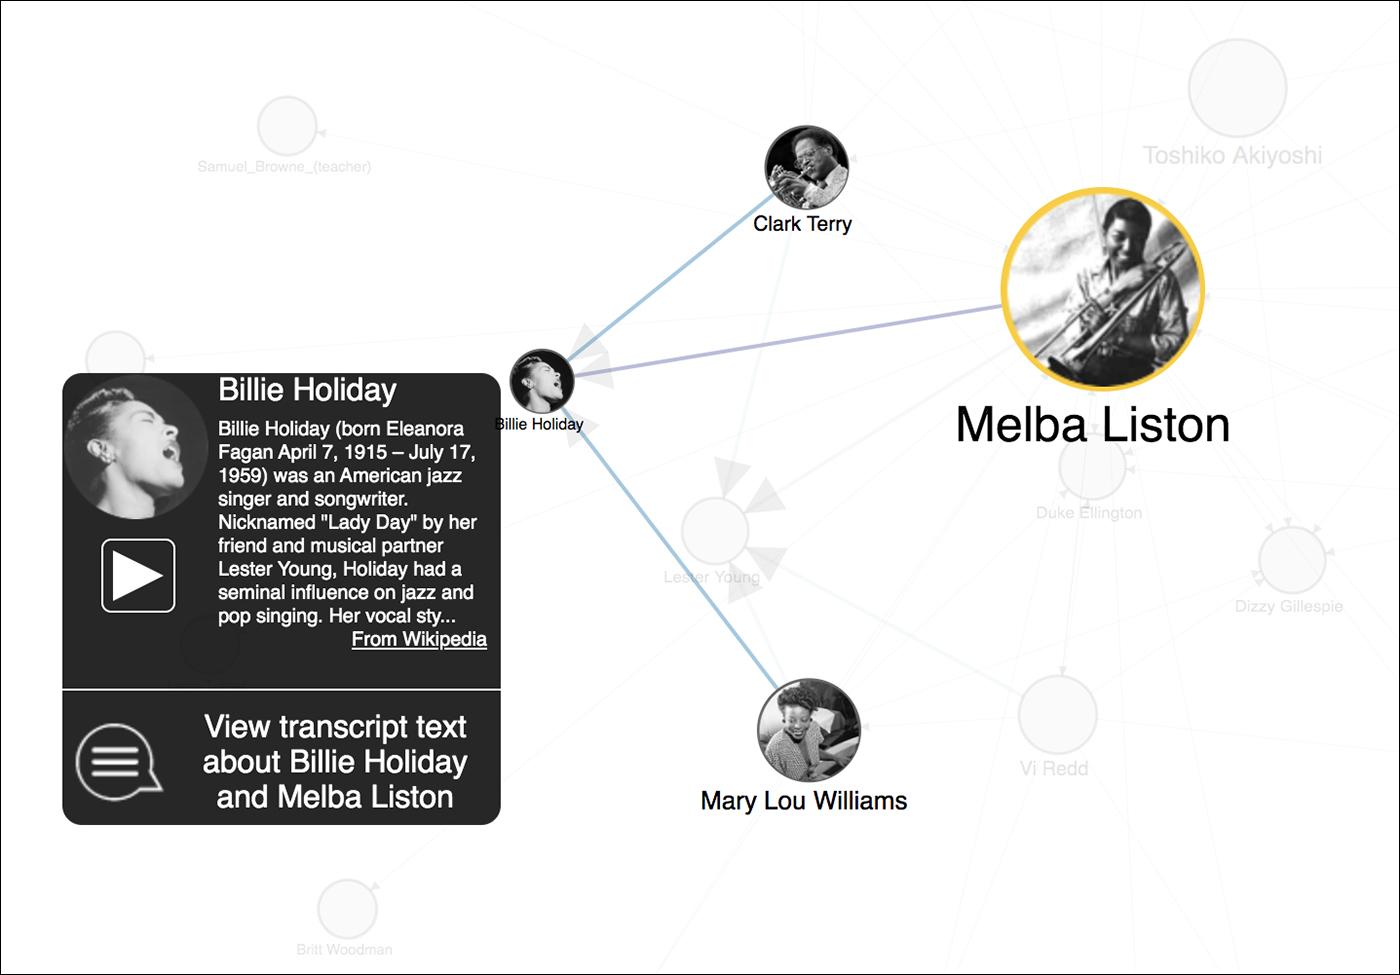 Exploring the connections for Melba Liston on Linked Jazz (courtesy Linked Jazz